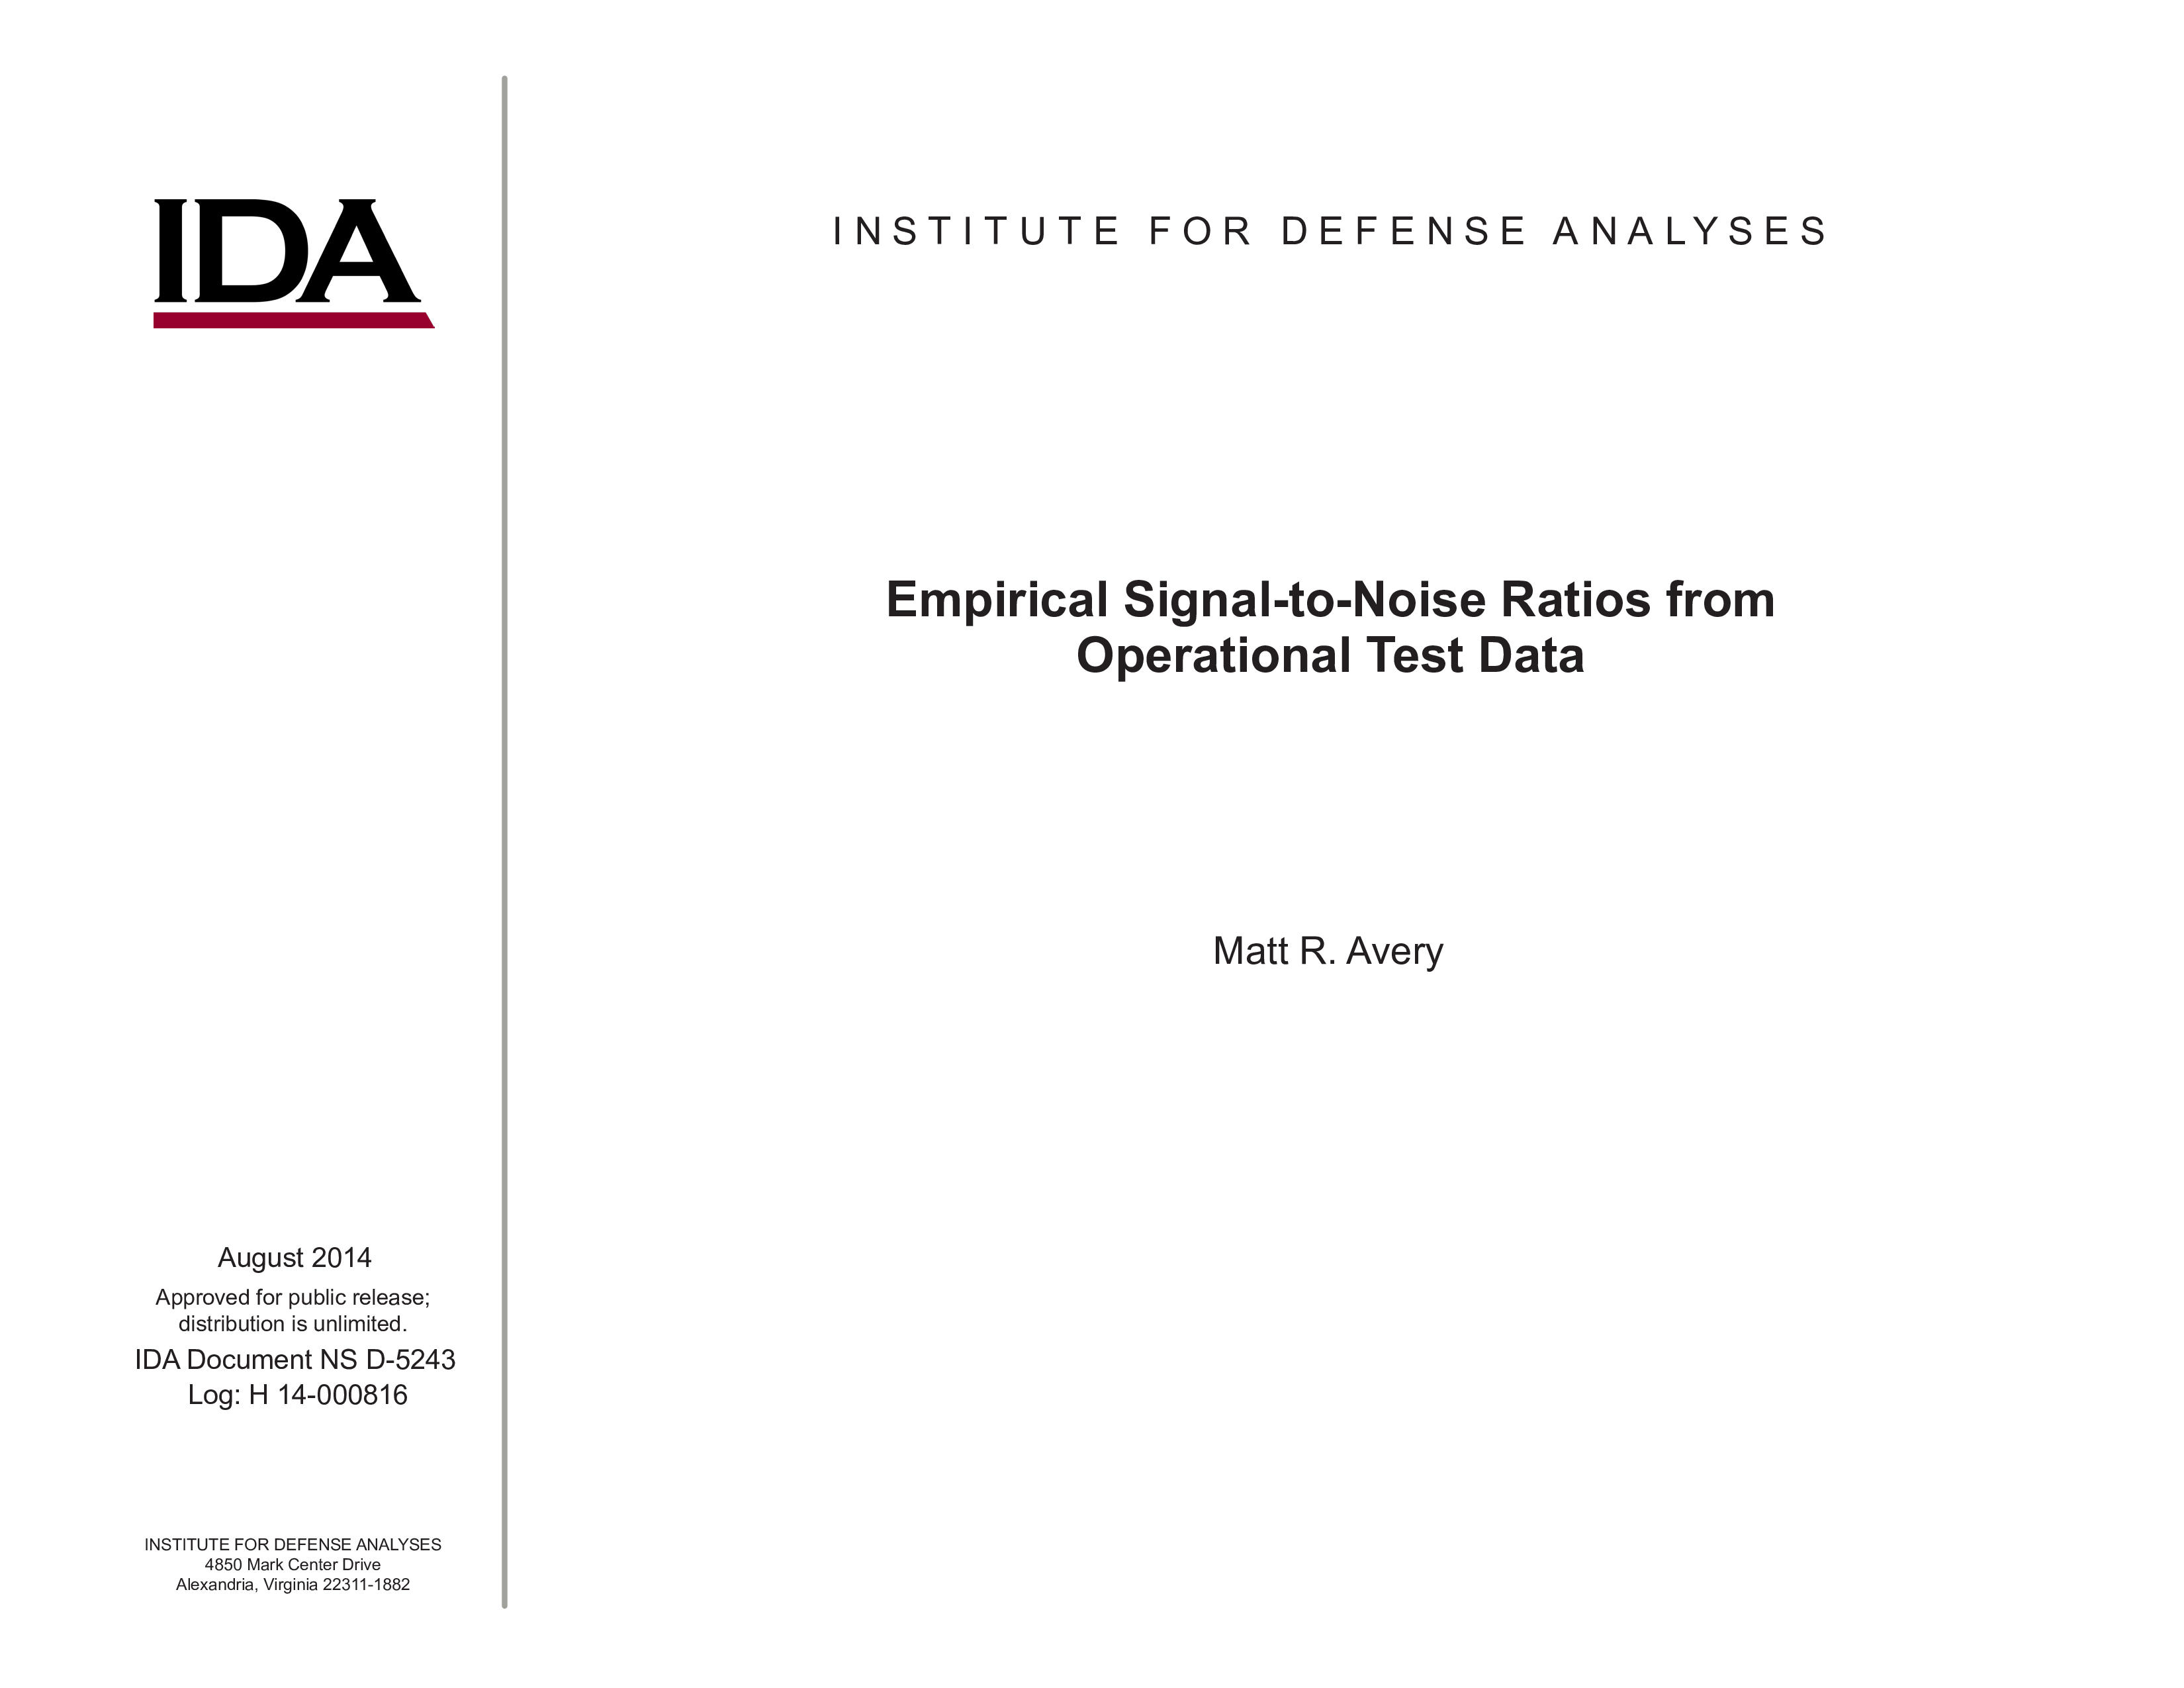 Empirical Signal-to-Noise Ratios from Operational Test Data